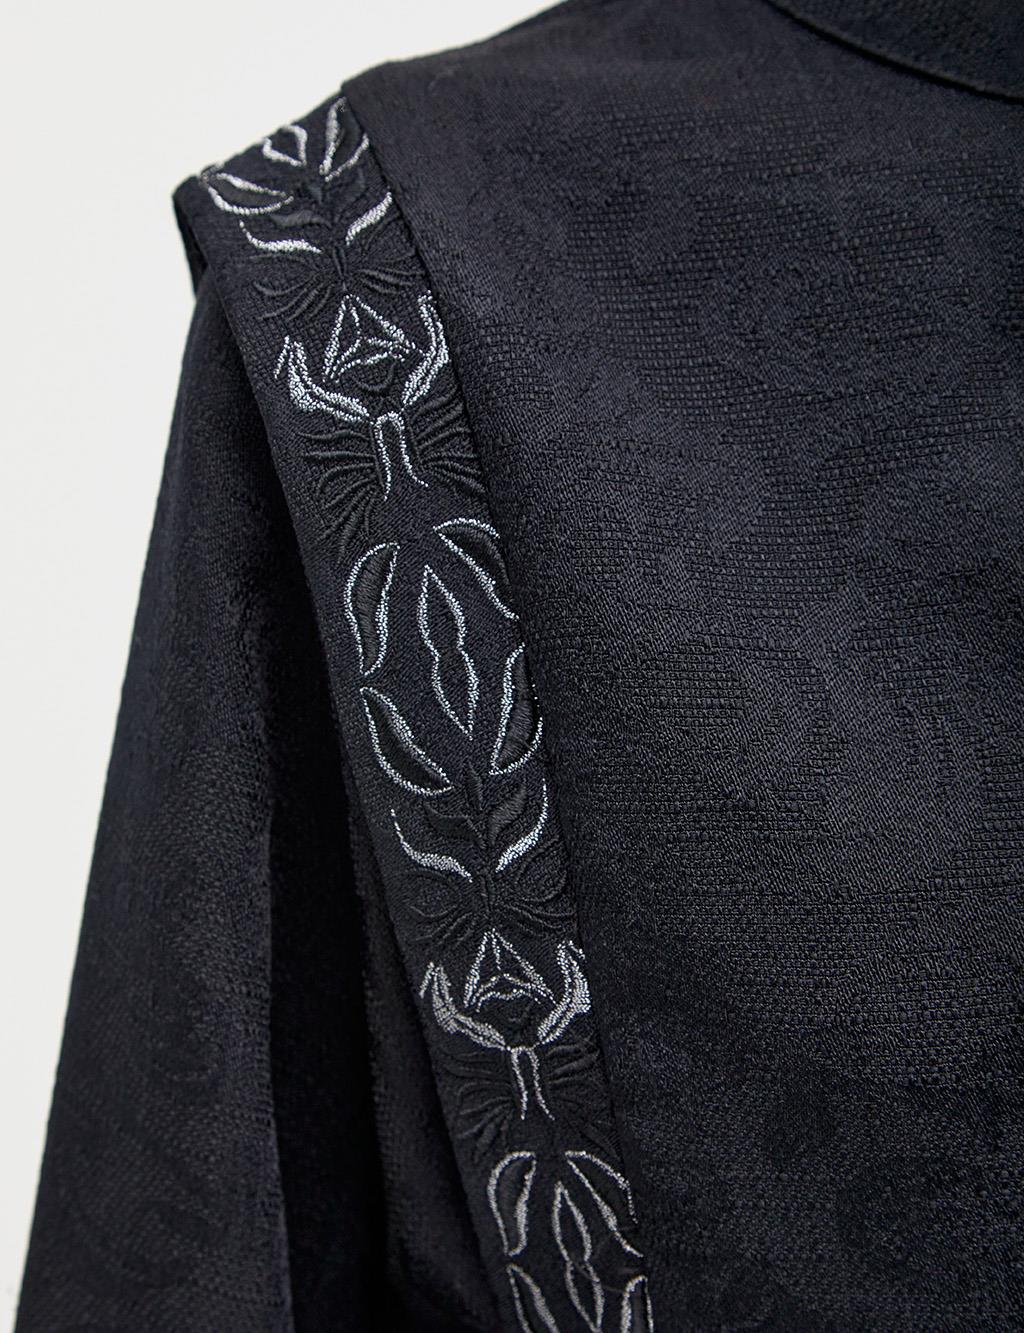 Embroidered Crinkle Tunic Black